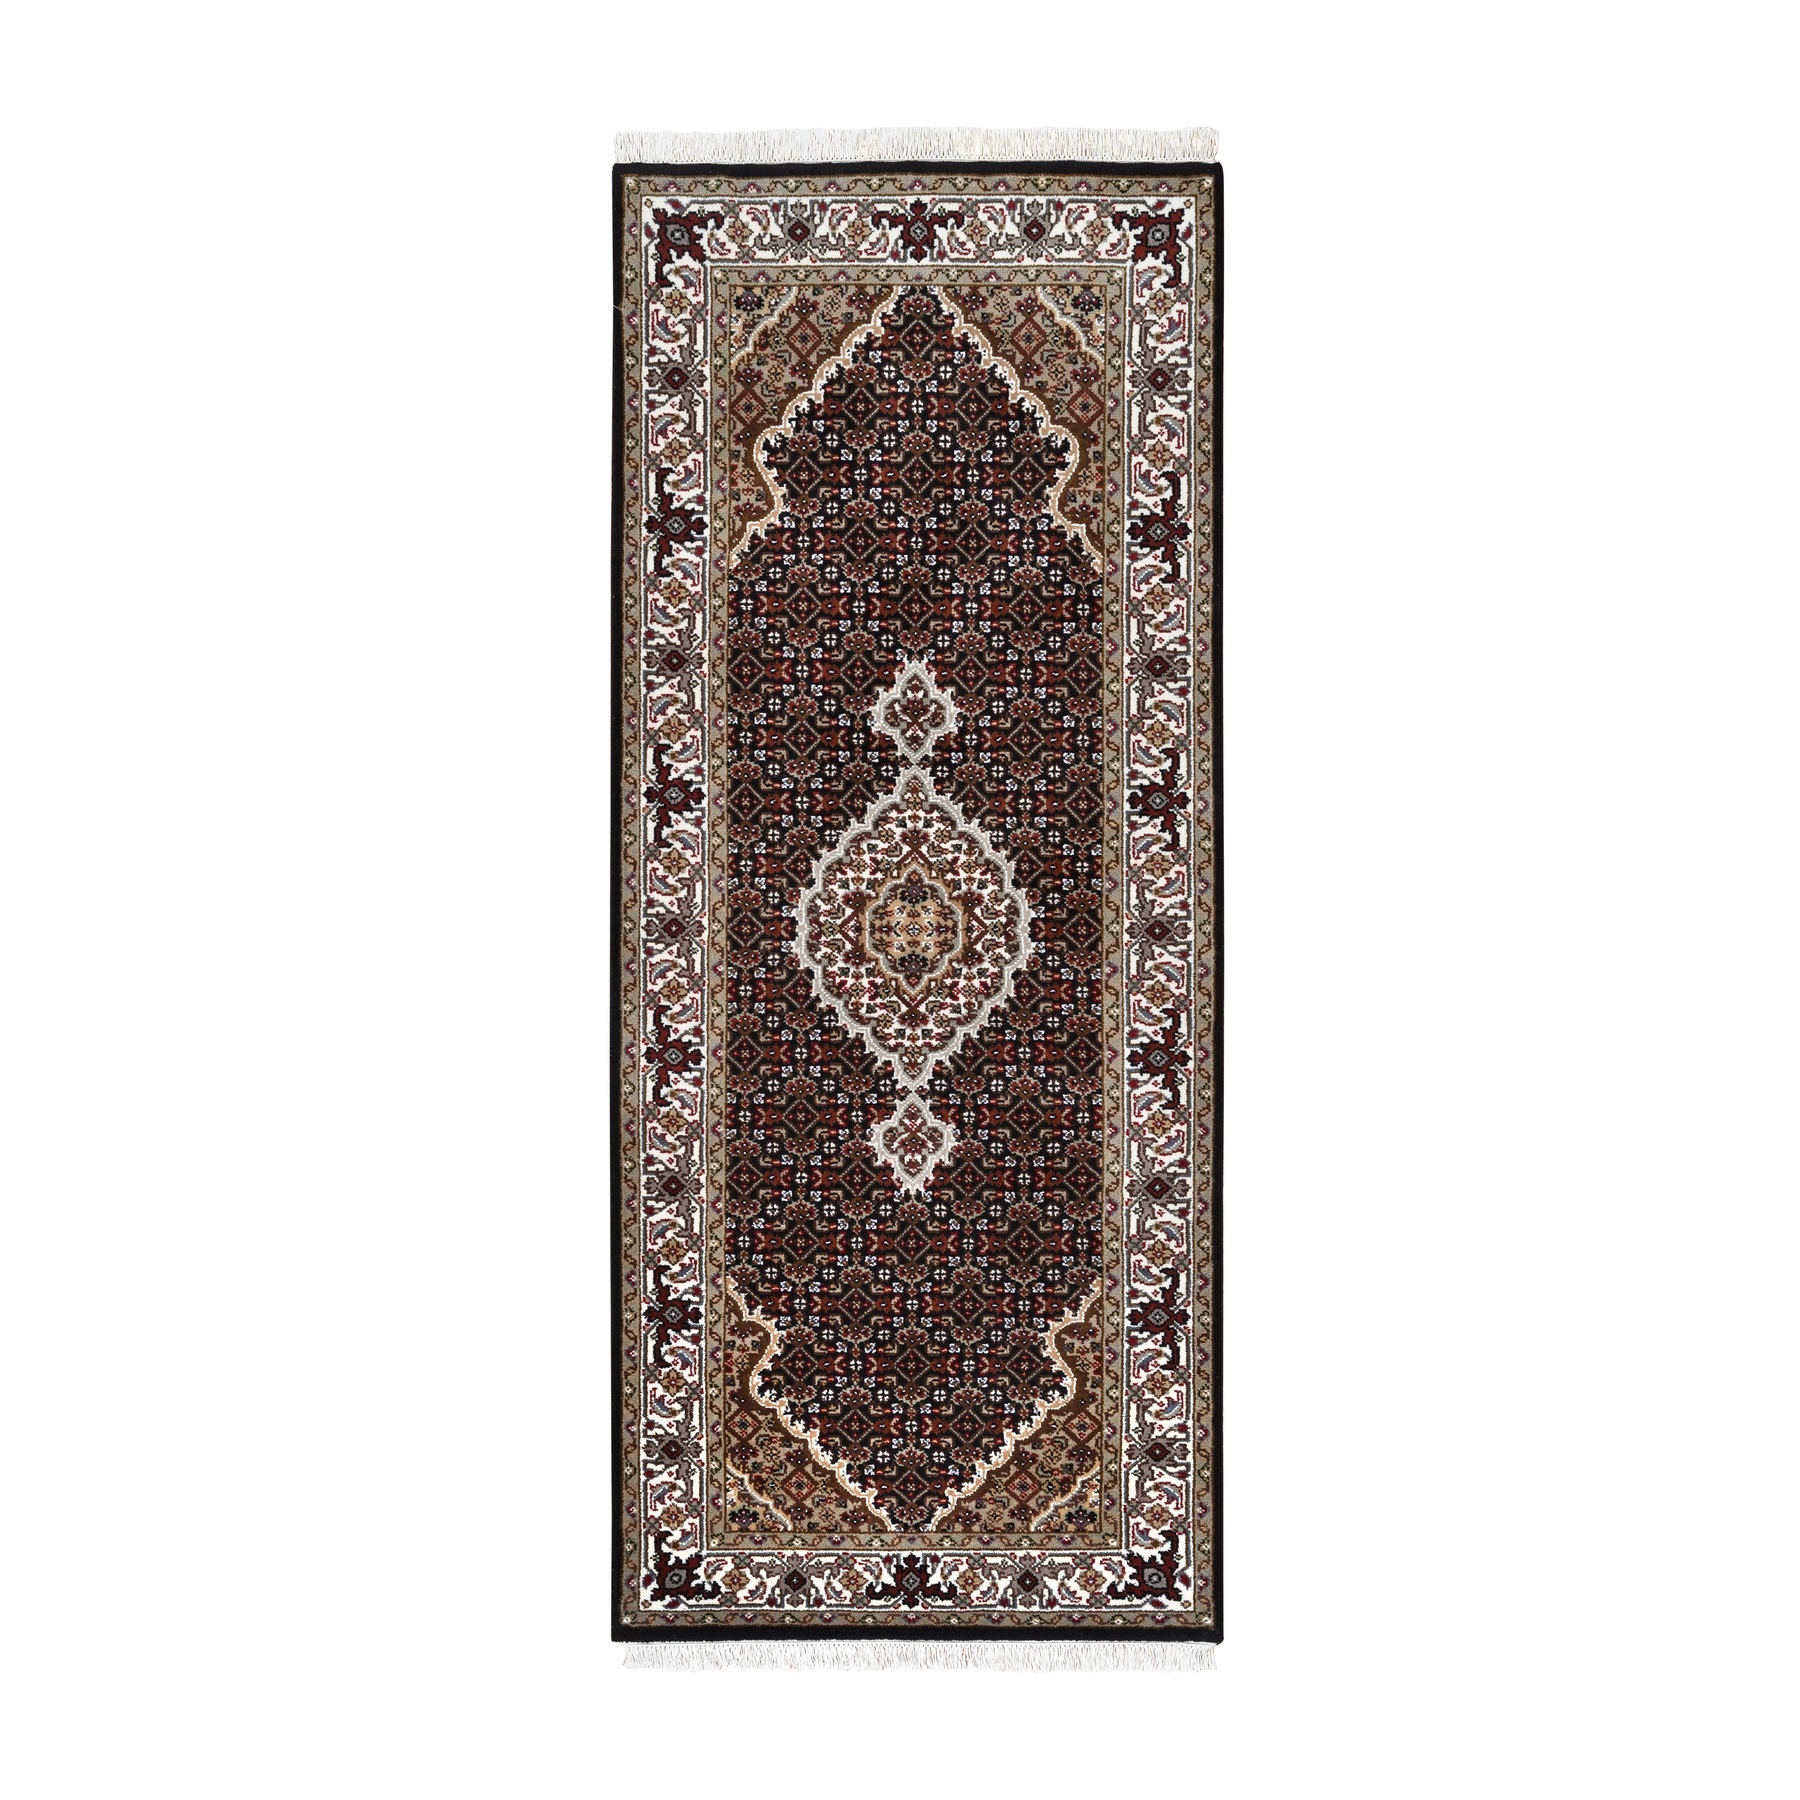 Pirniakan Collection Hand Knotted Black Rug No: 1124954